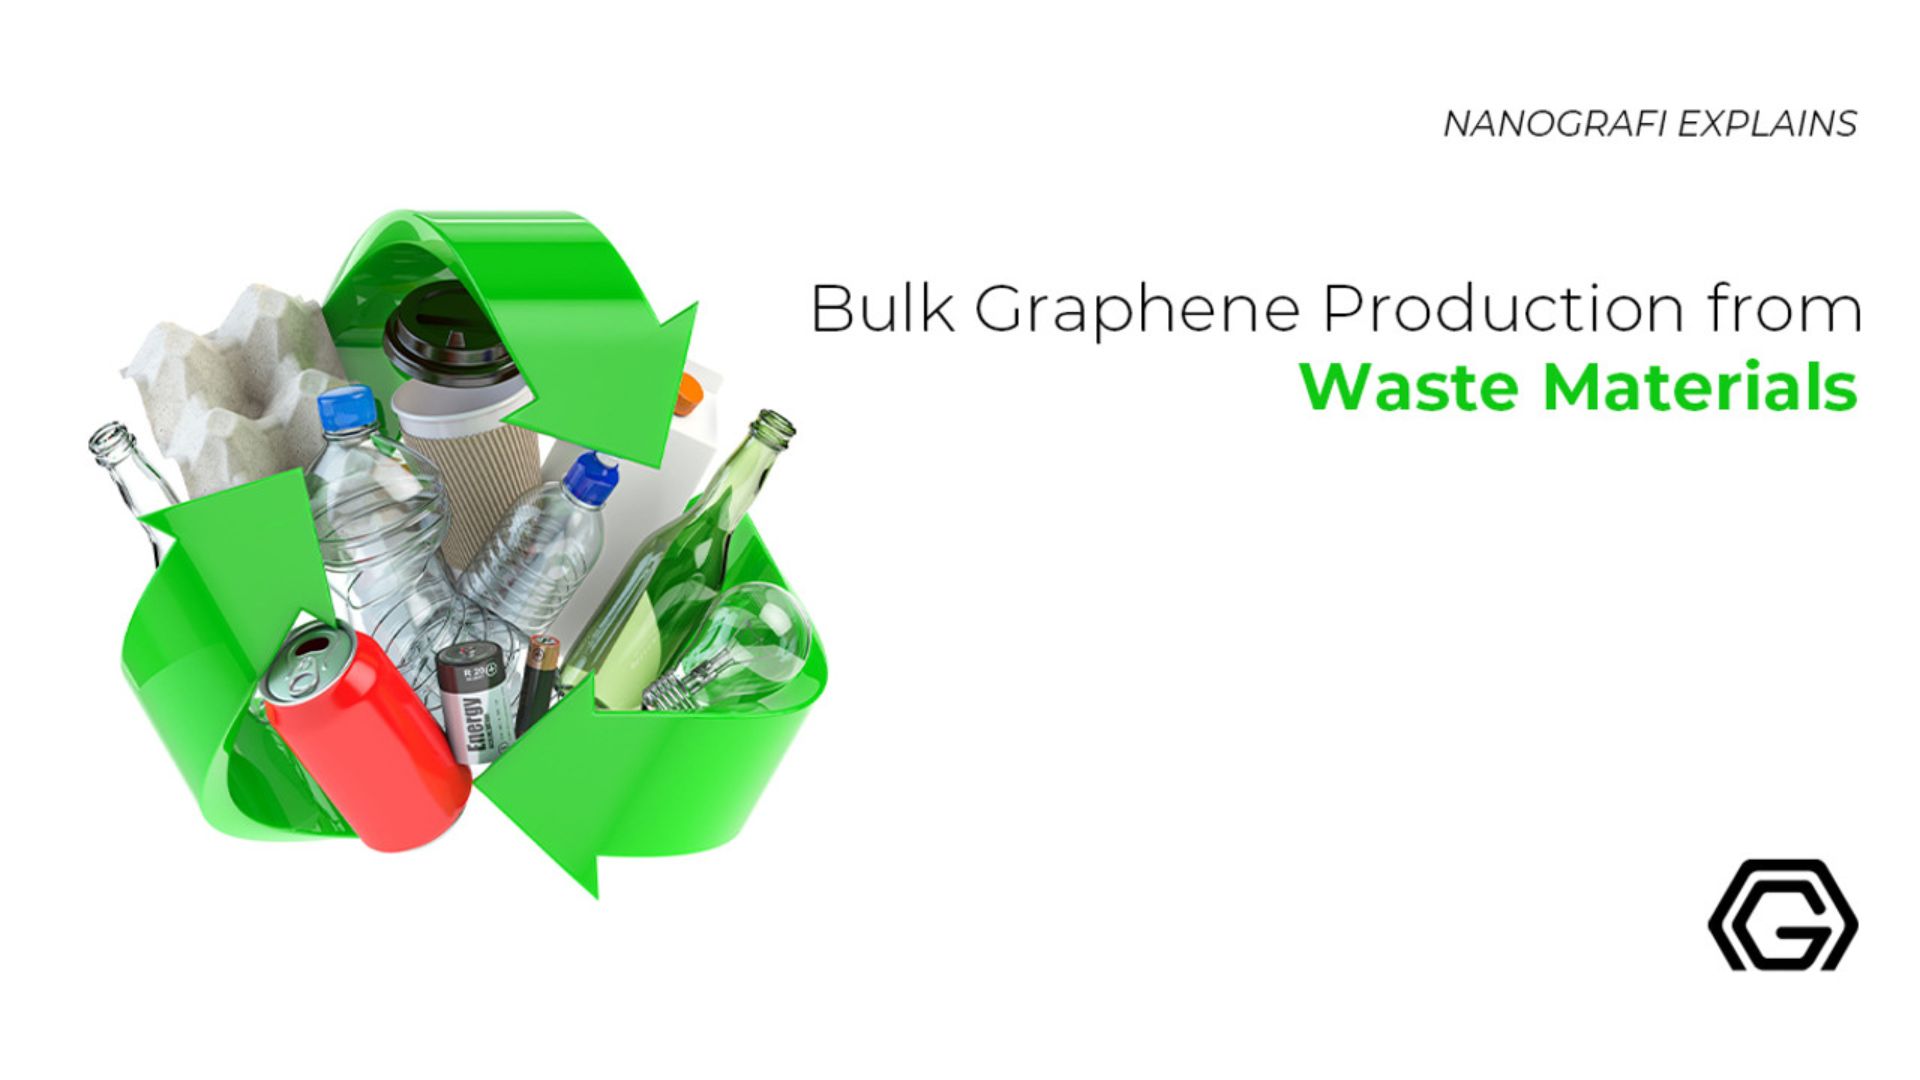 Bulk graphene production from waste materials